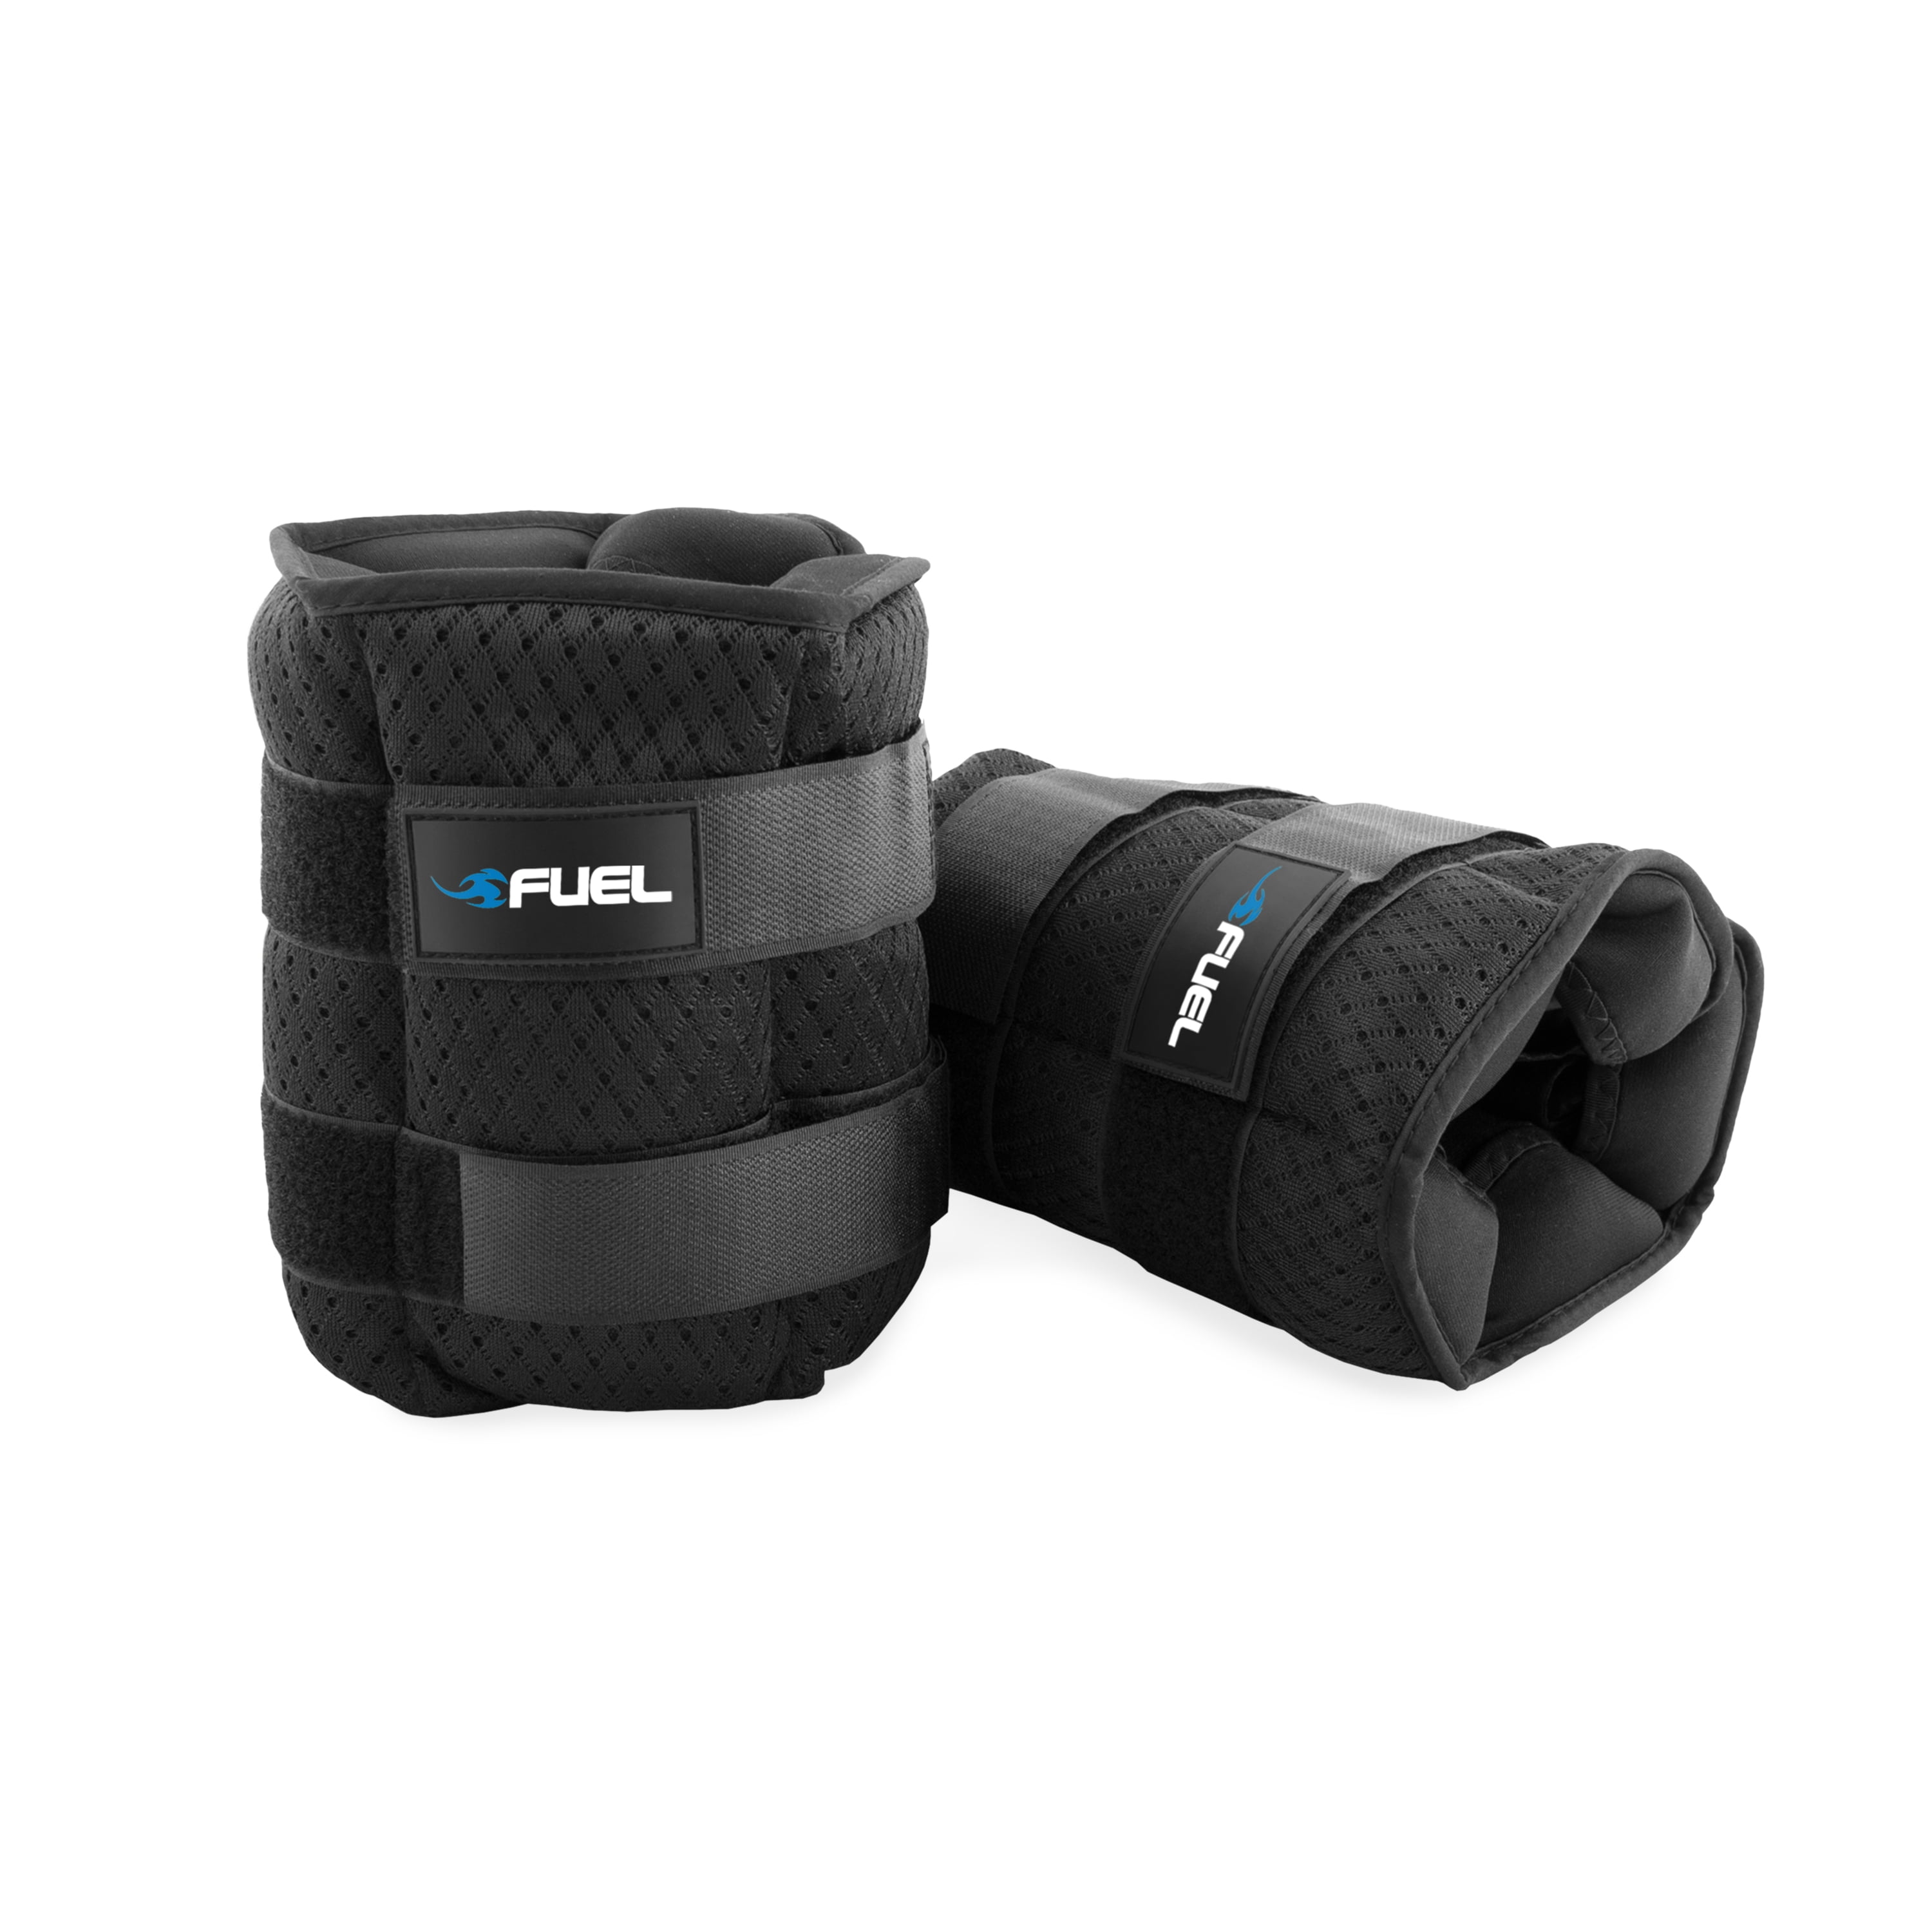 Adjustable Ankle Weights –